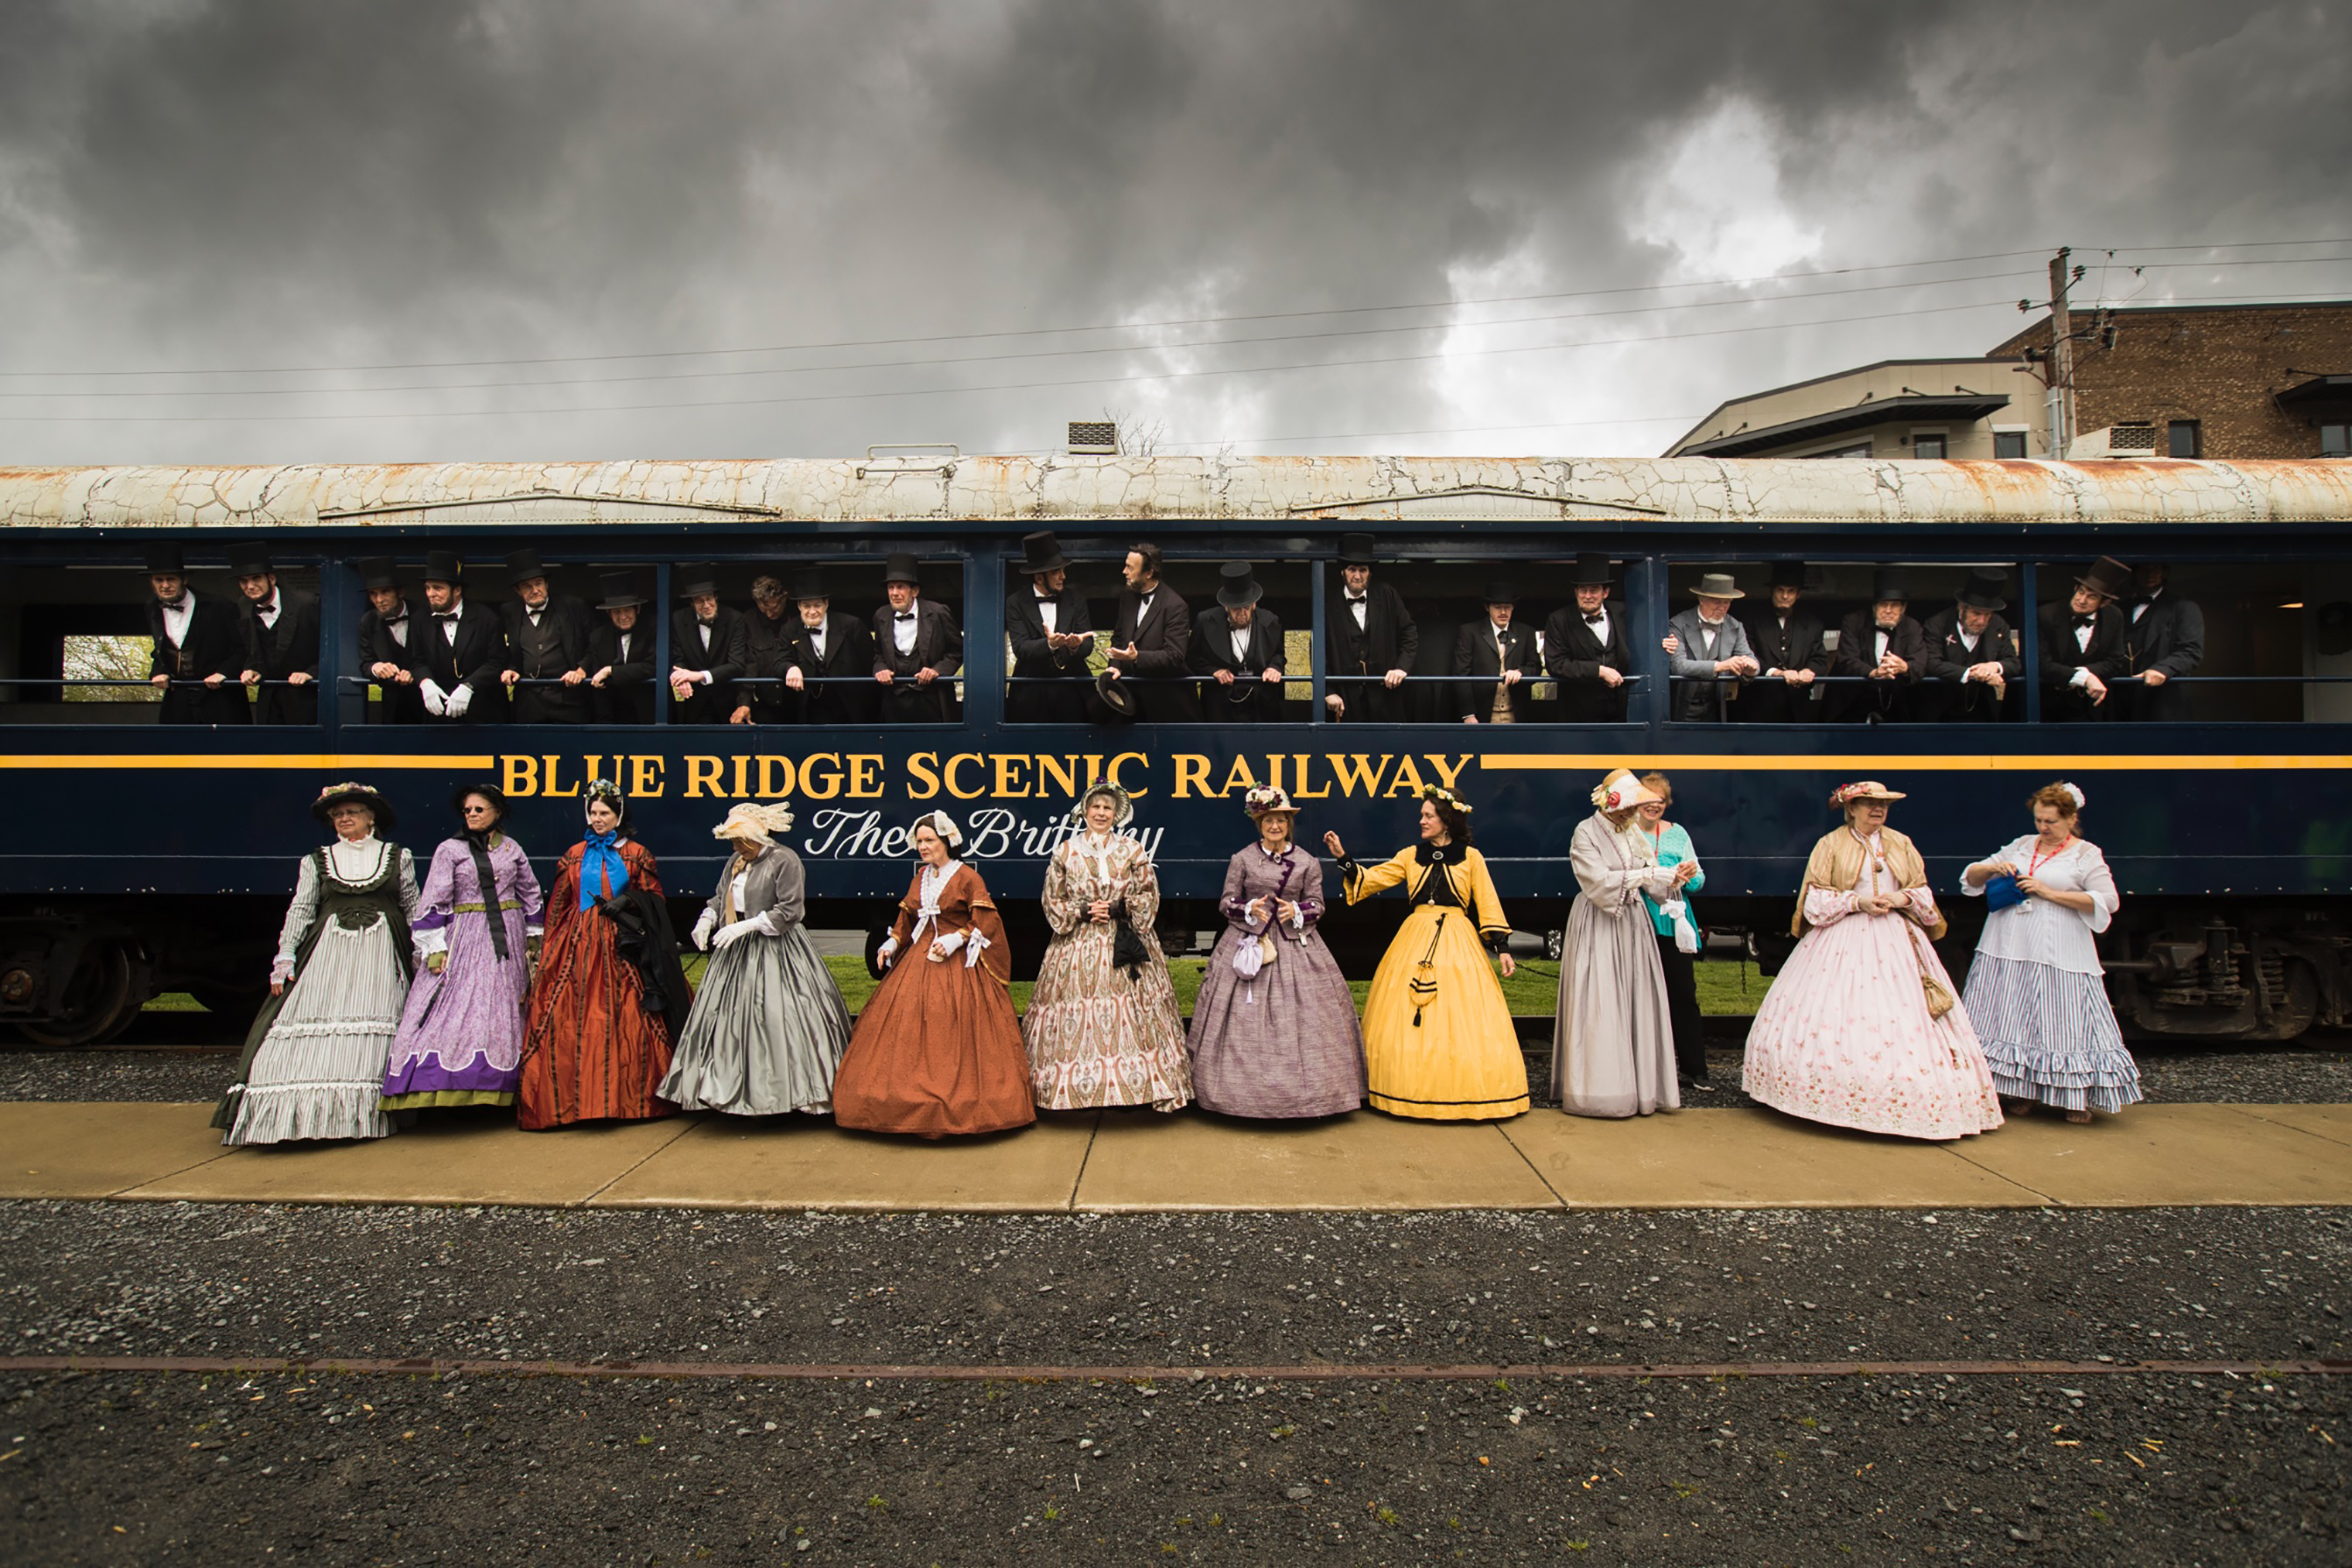 The Lincoln presenters group prepares to pose for a portrait in front of the railway in Blue Ridge, Georgia. They traveled there to take the scenic historic train ride to McCaysville, Ga., for lunch and shopping on April 12. (Benjamin Norman for TIME)